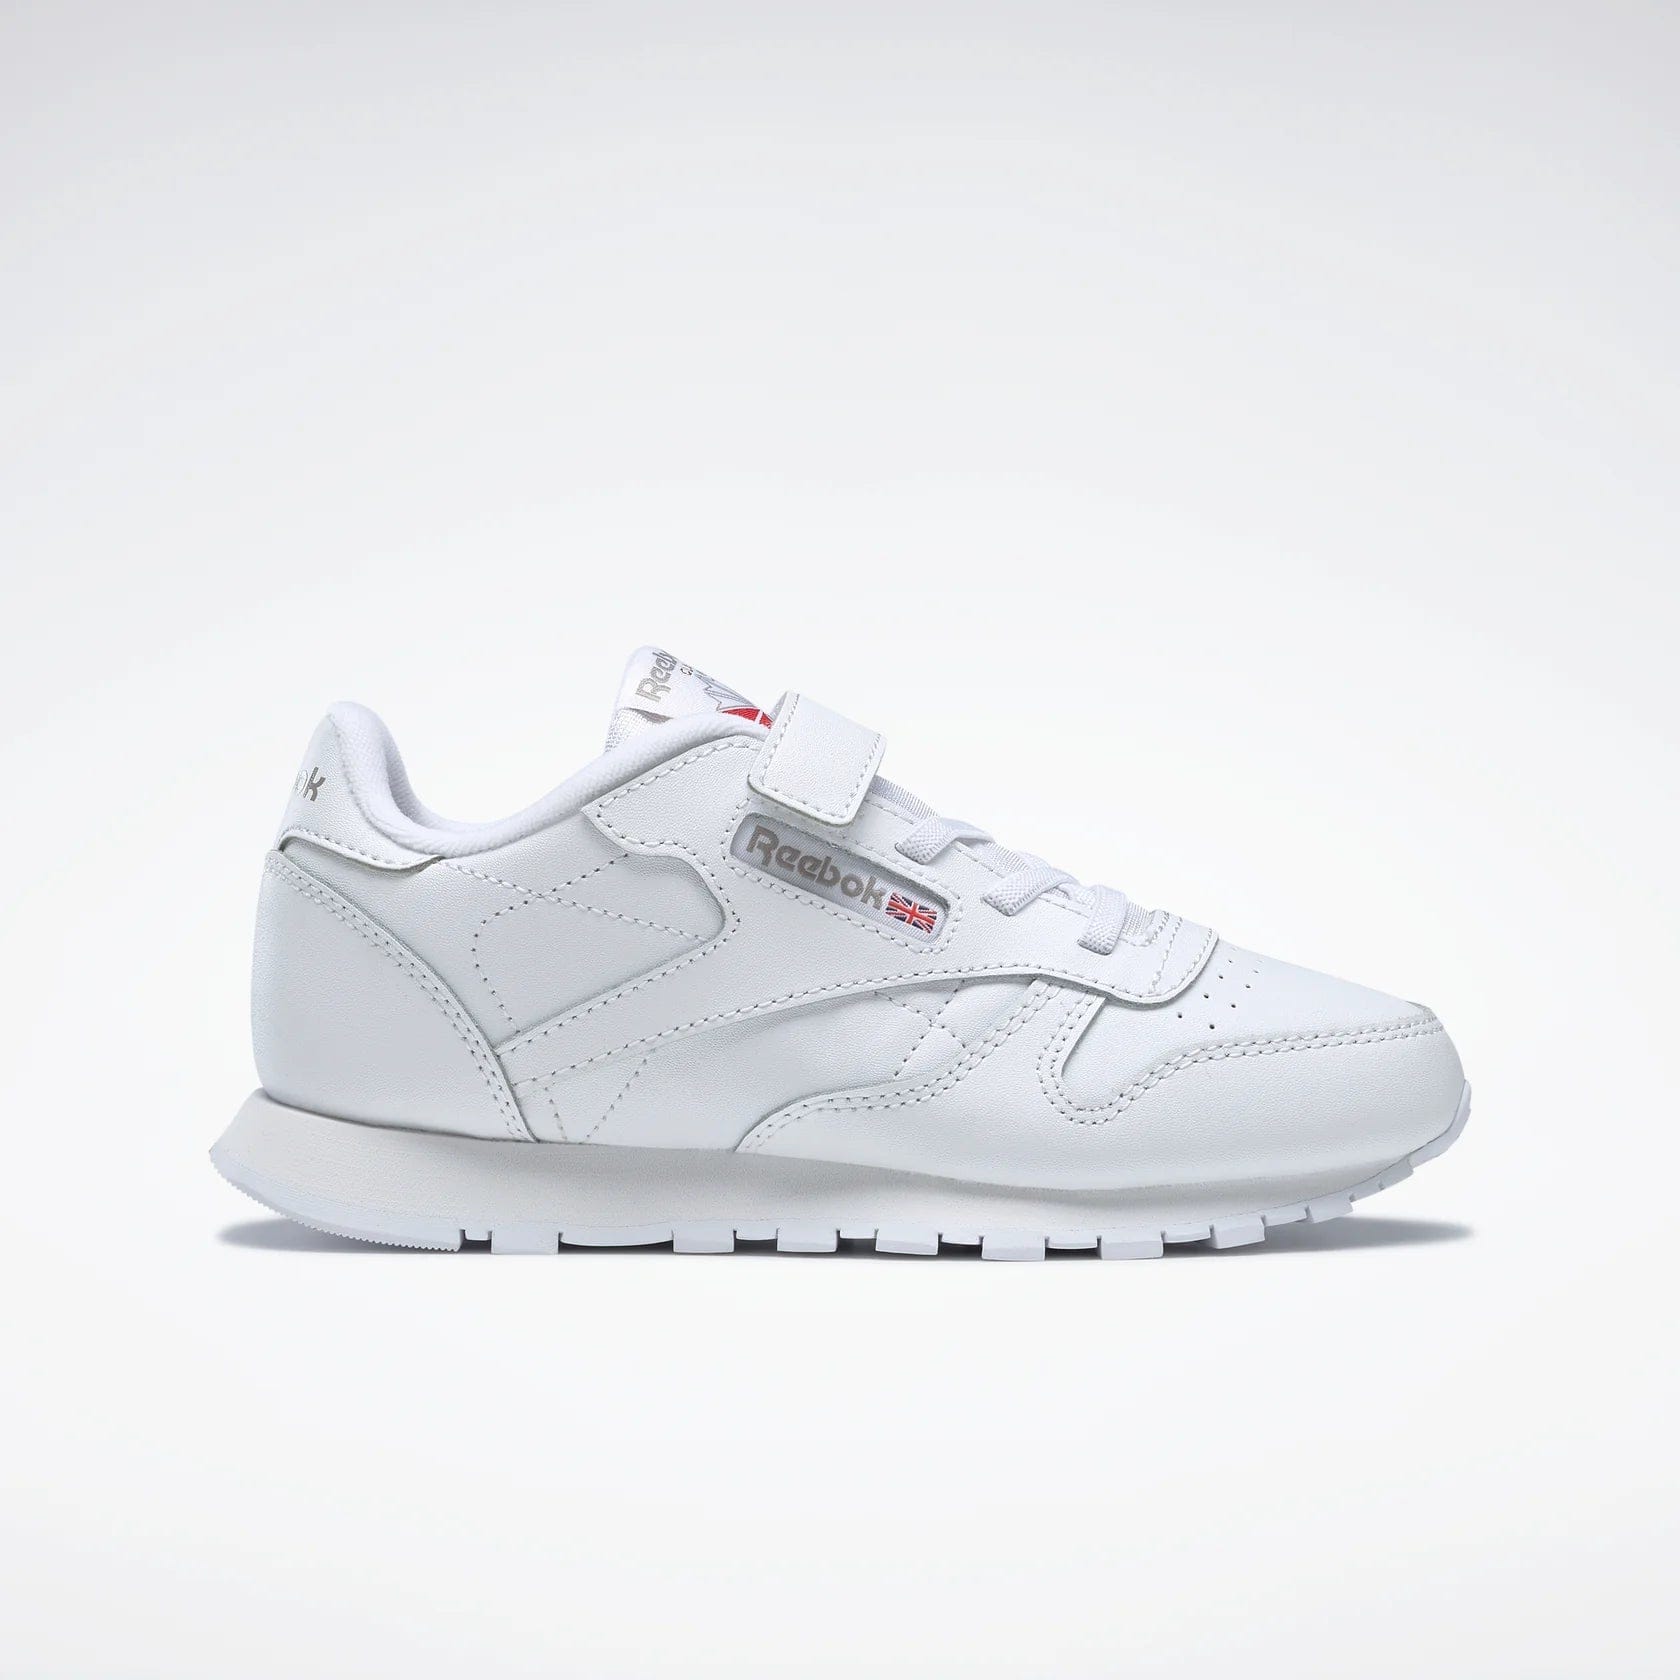 Reebok REEBOK TODDLER'S CLASSIC LEATHER SHOES WHITE SHOES - INSPORT